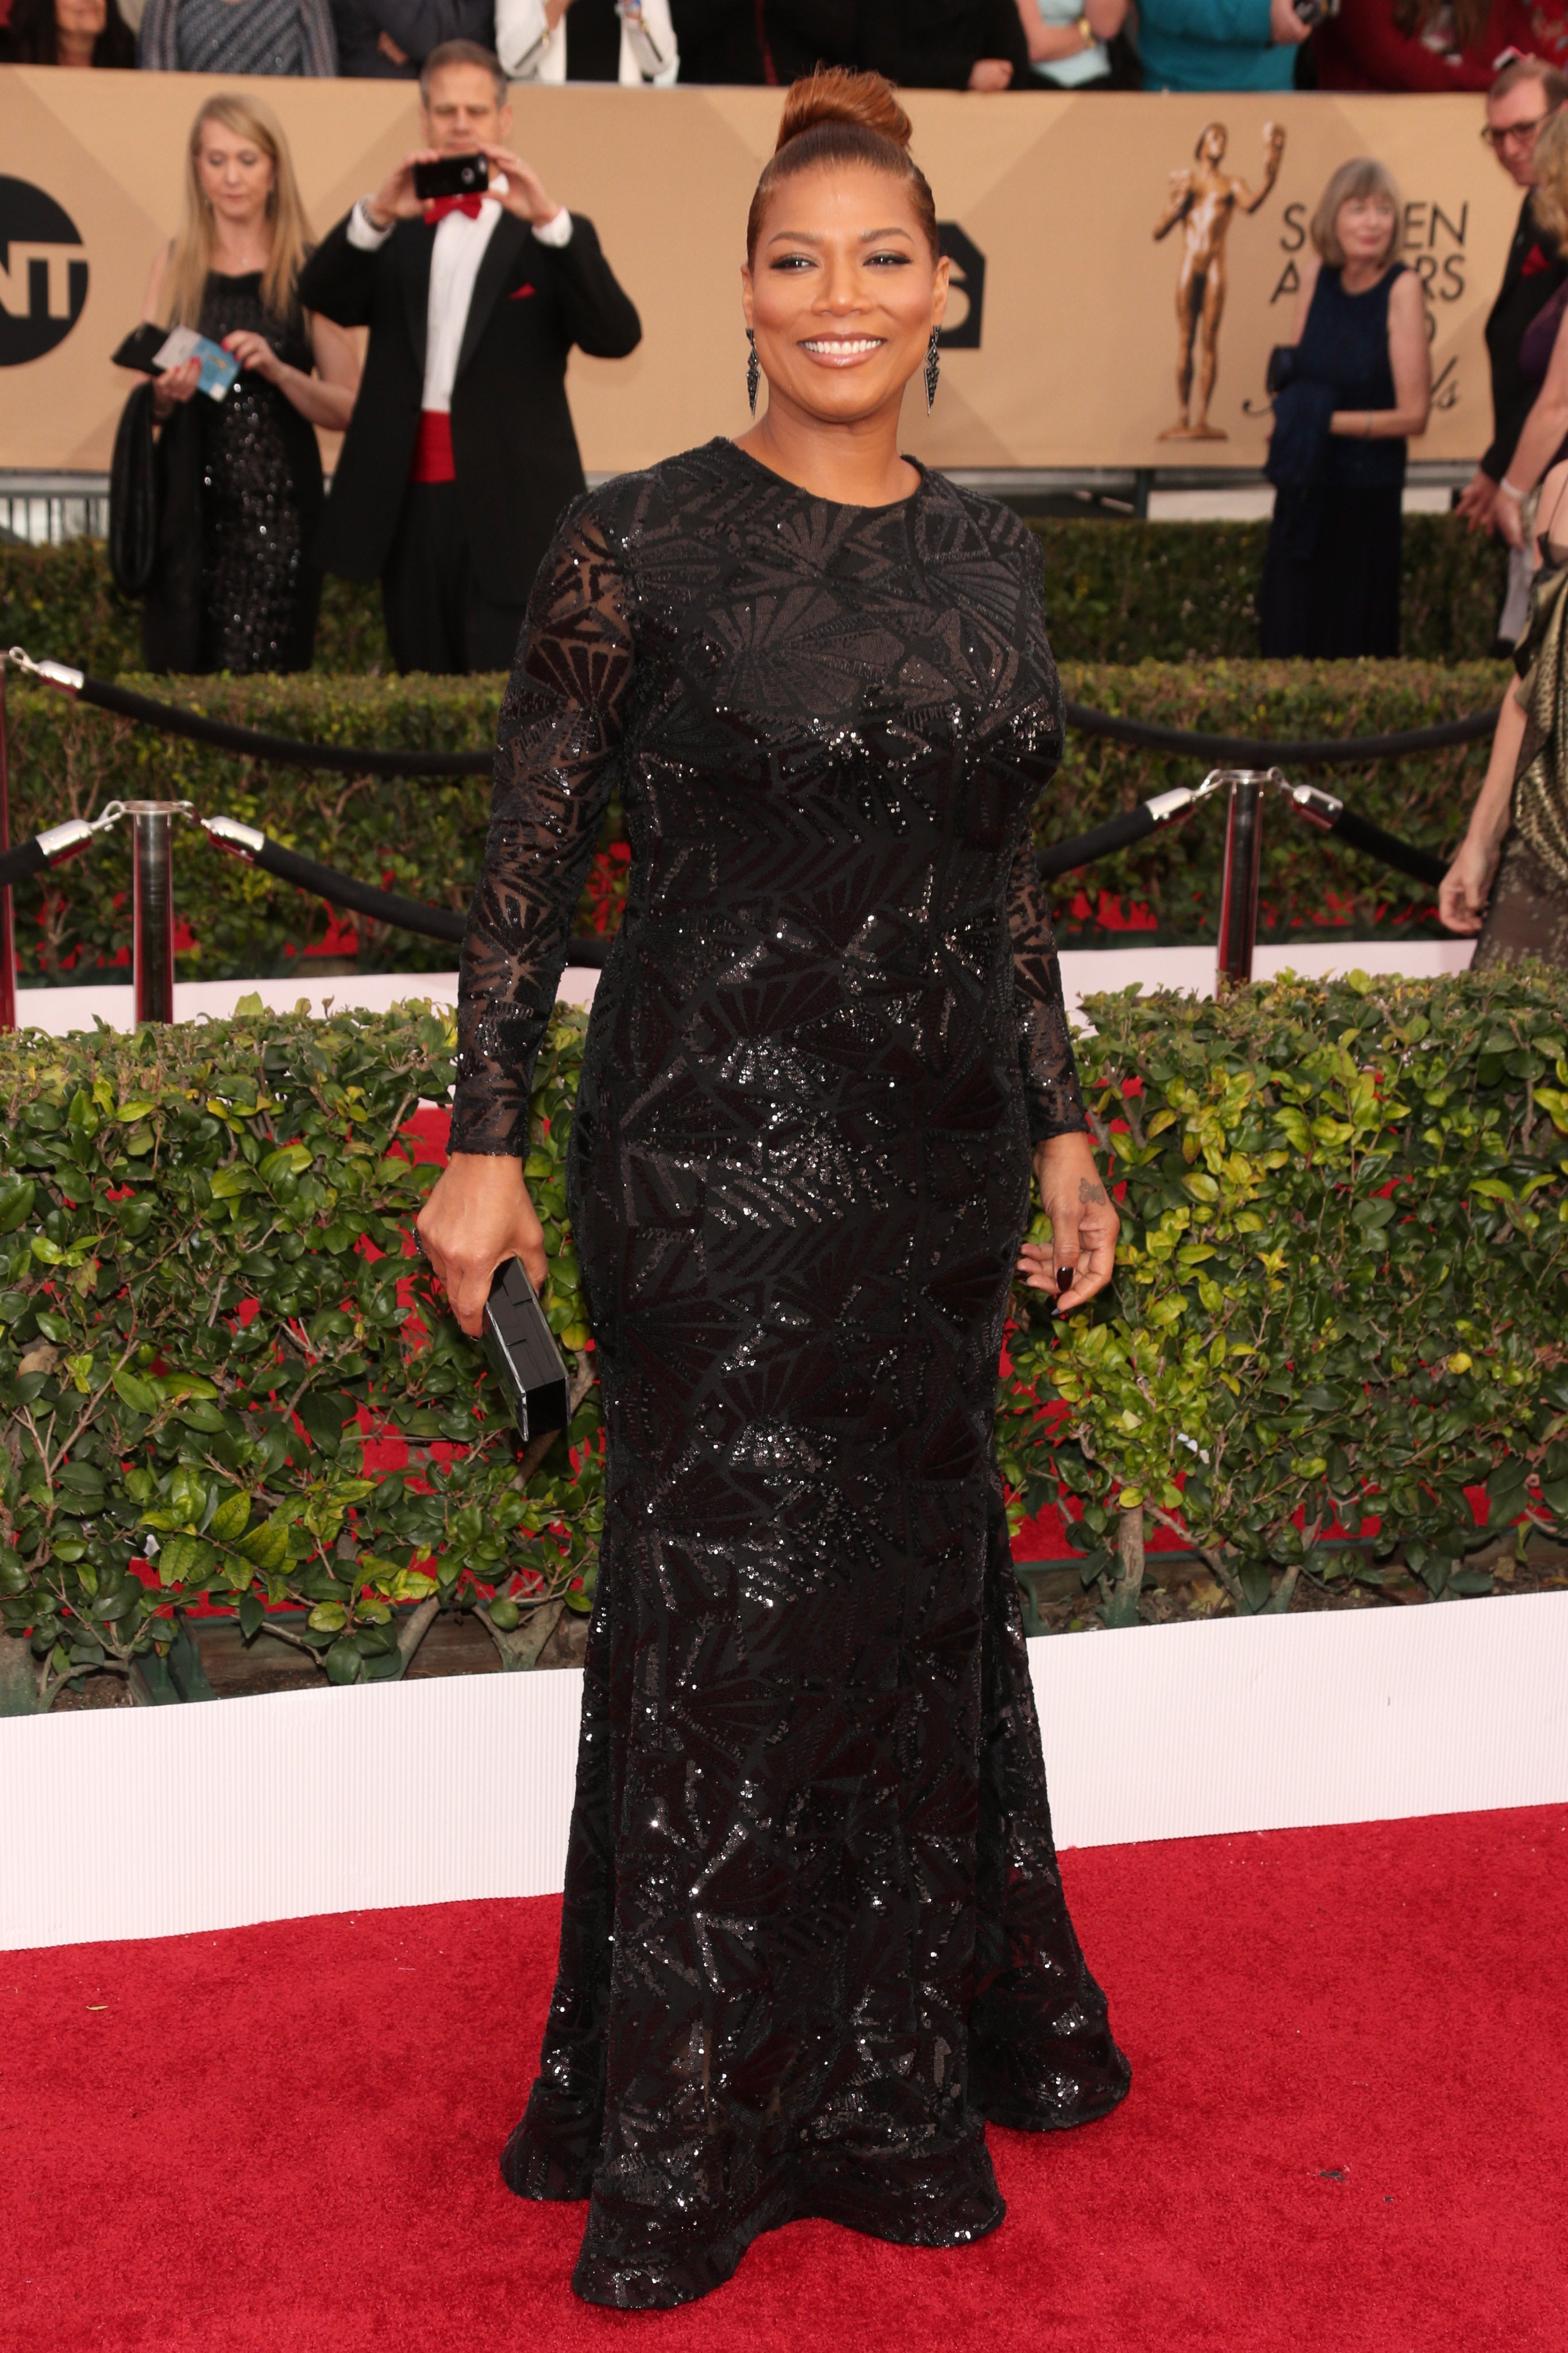 7 Jaw-Dropping Looks From the 2016 SAG Awards
